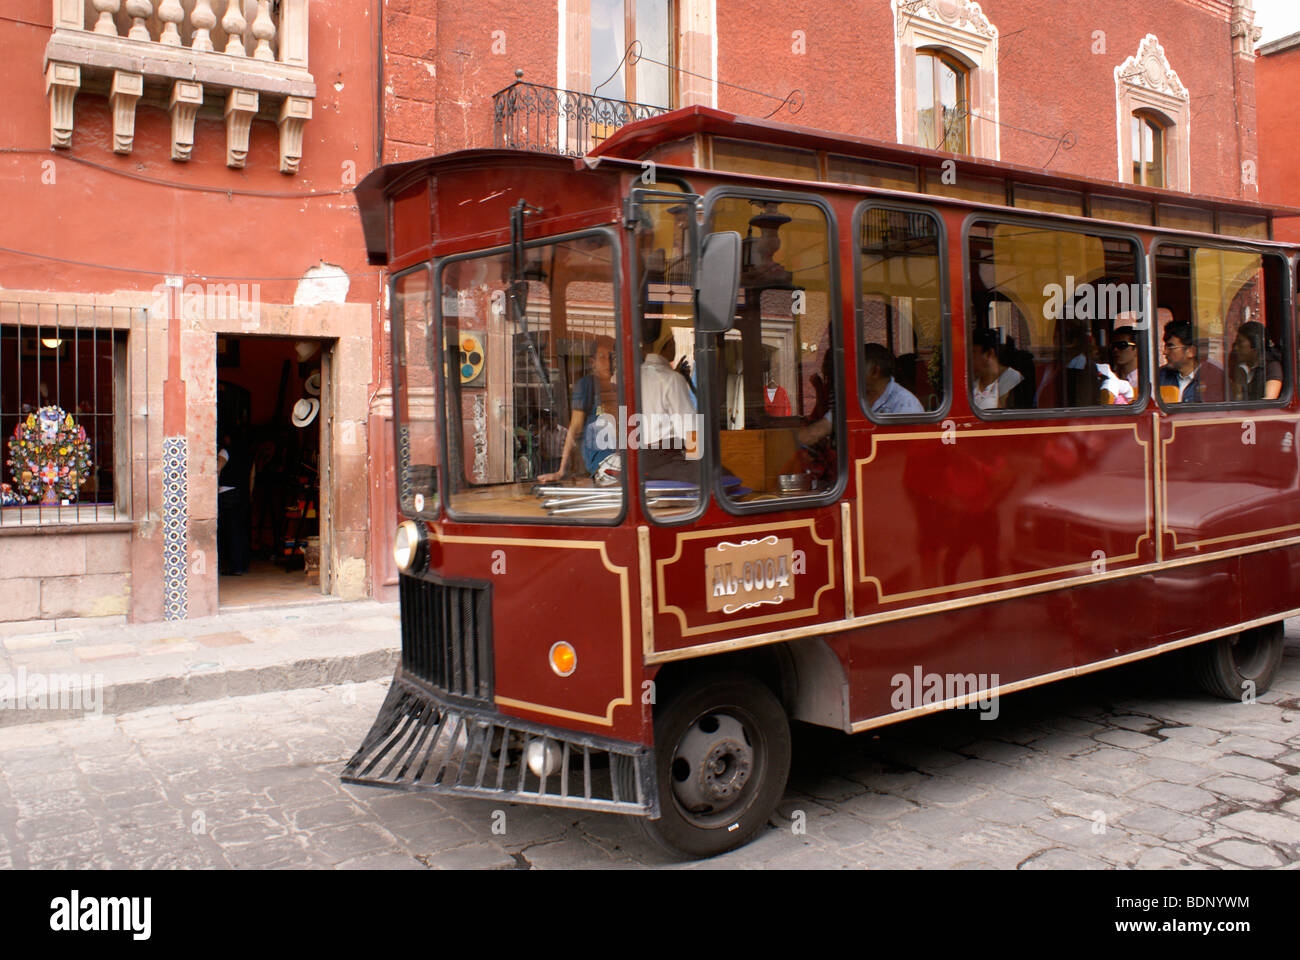 Sightseeing trolley bus on a street in San Miguel de Allende, Guanajuato, Mexico Stock Photo